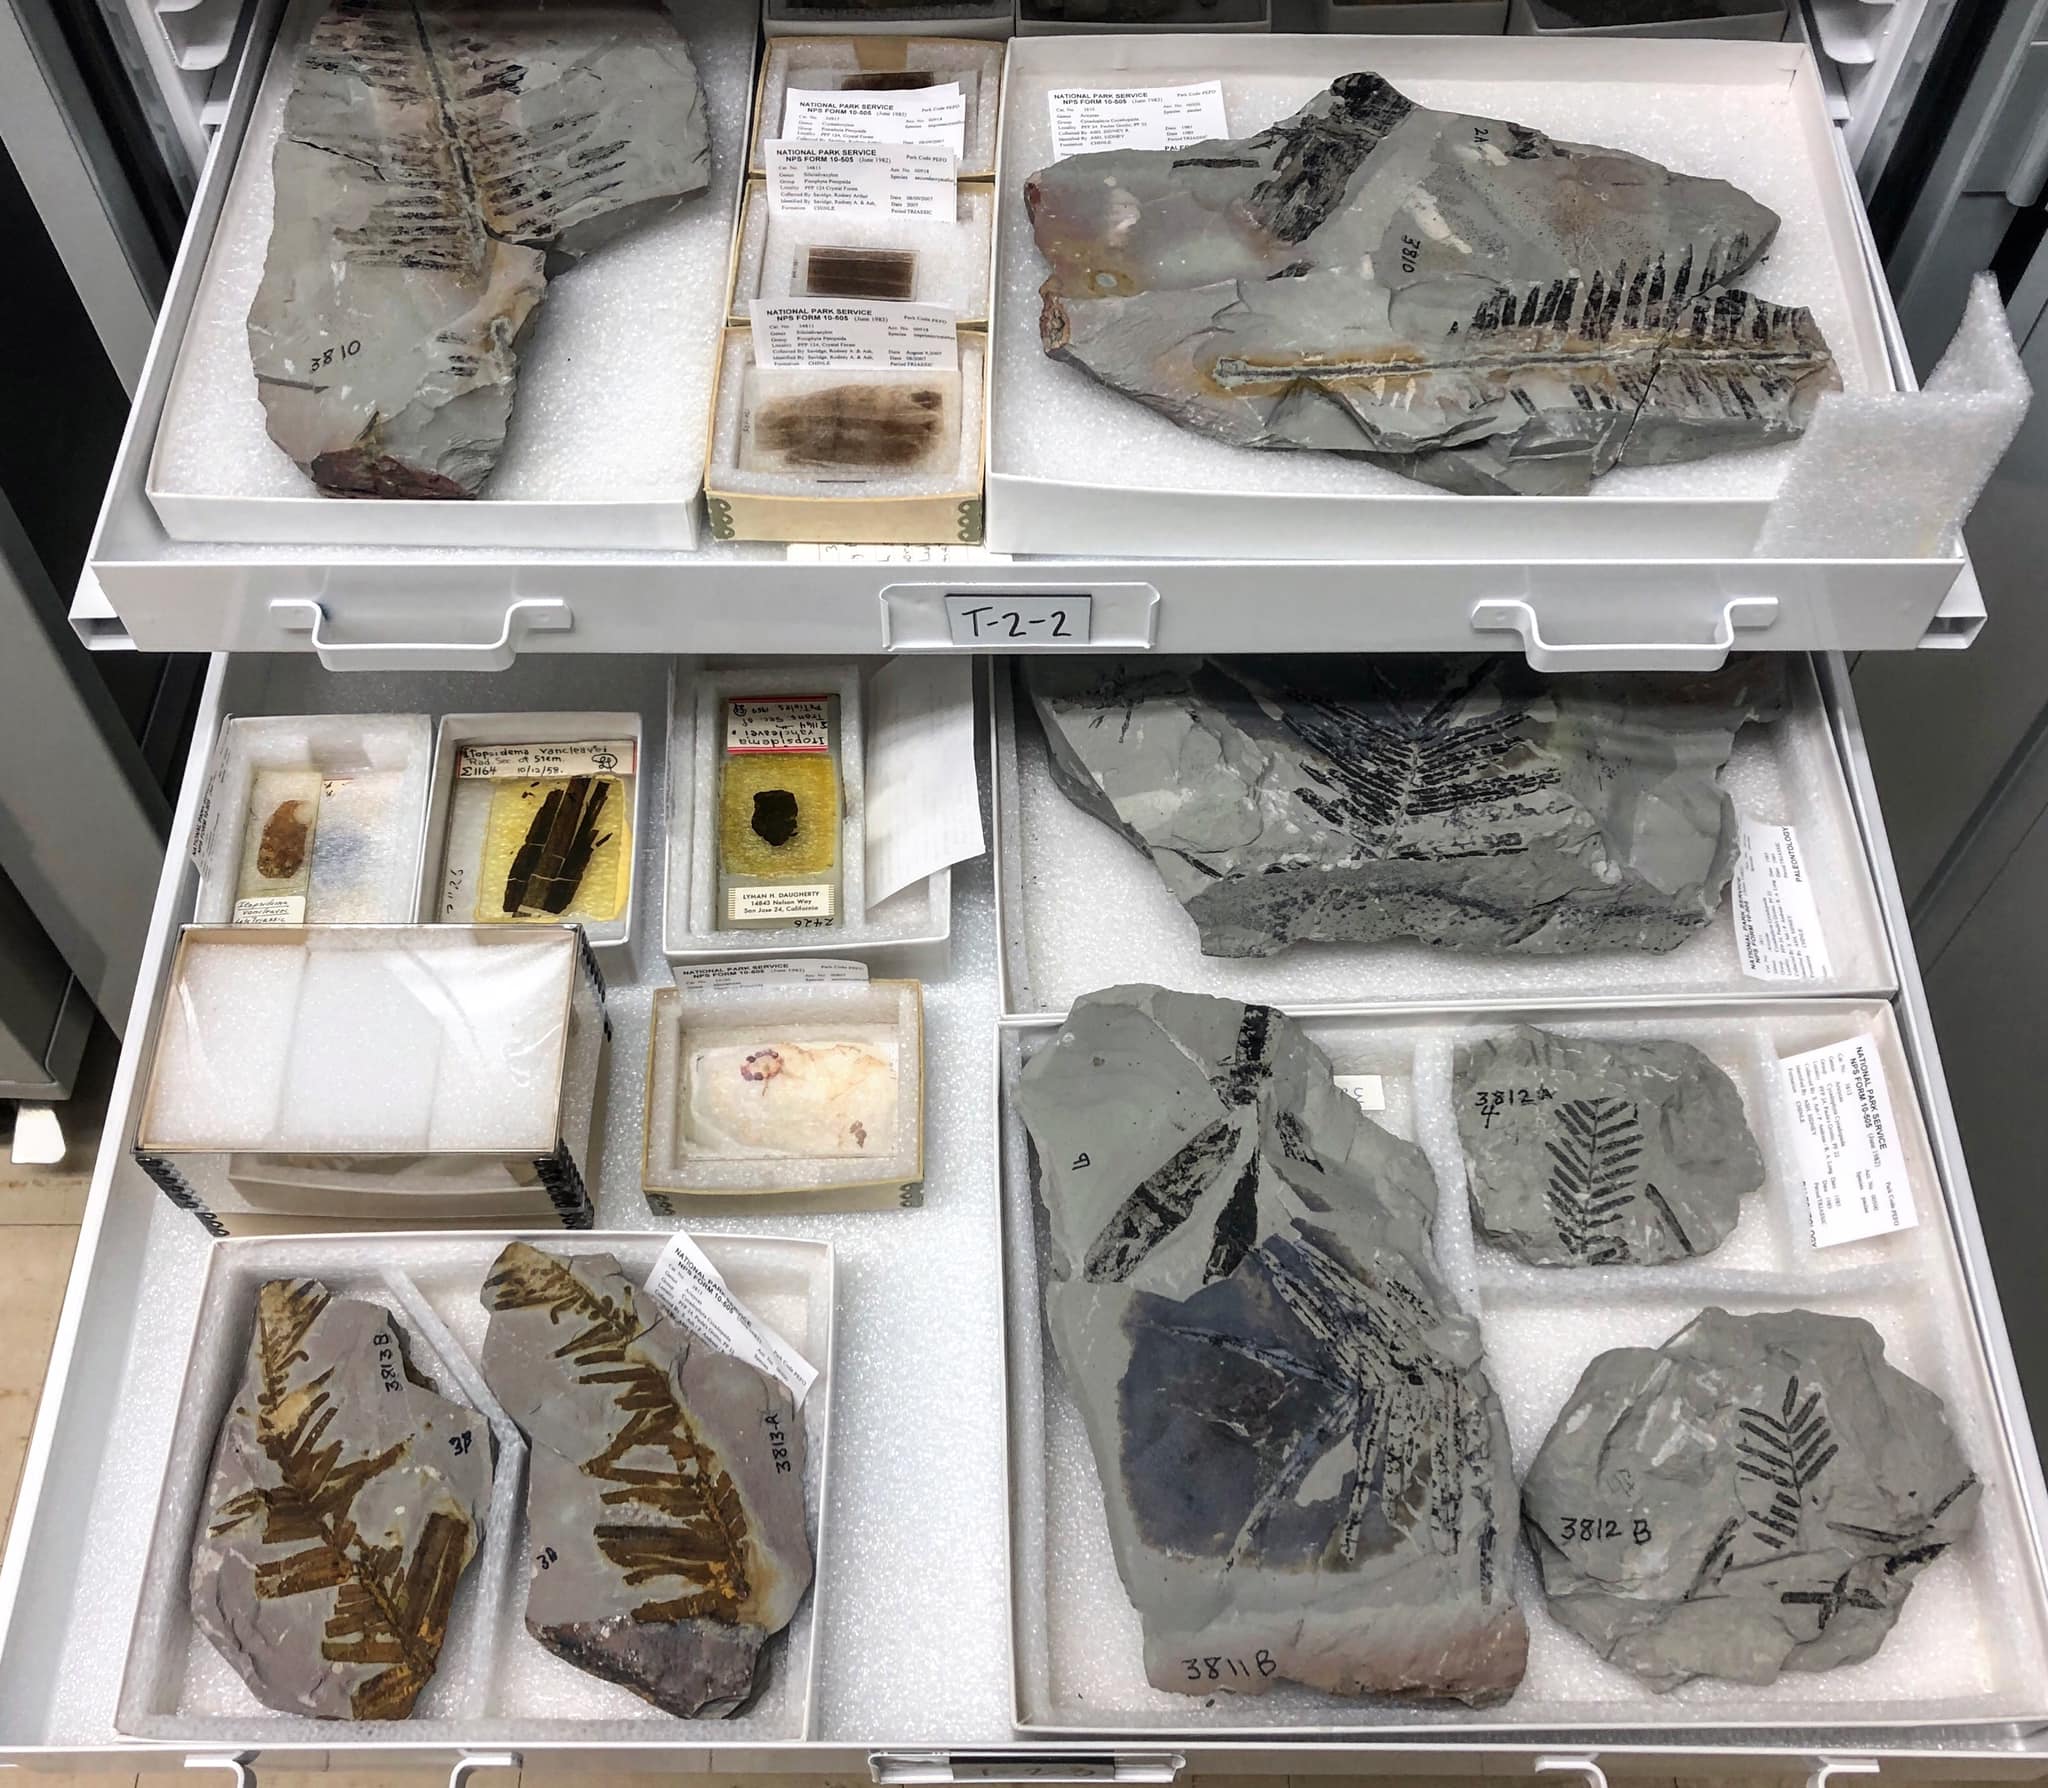 Two large metal shelves have been pulled out to display fossils of plants and animals from the Late Triassic. Each fossil rests on a bed of Styrofoam with labels describing each fossil.